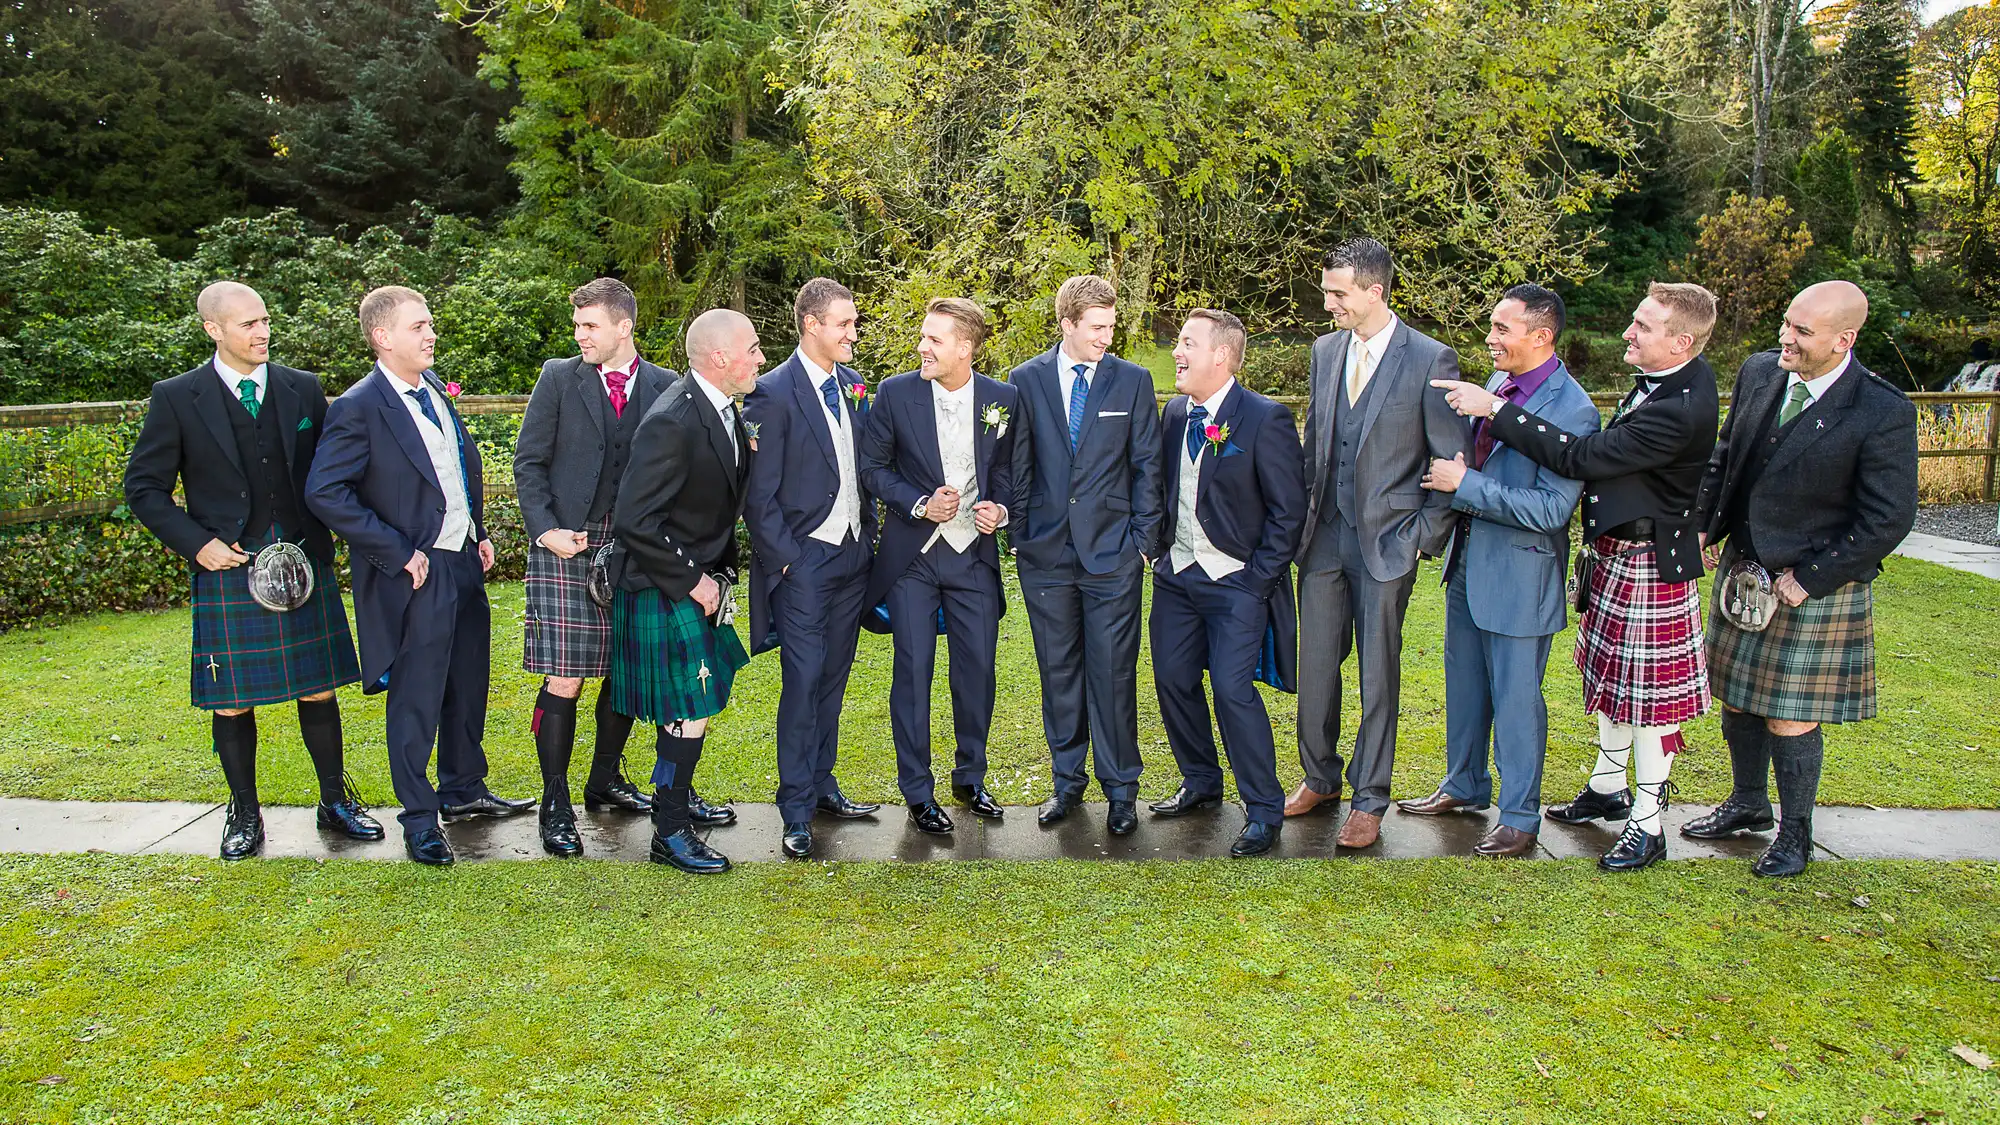 Group of men in suits and kilts smiling and interacting at an outdoor event, surrounded by greenery.